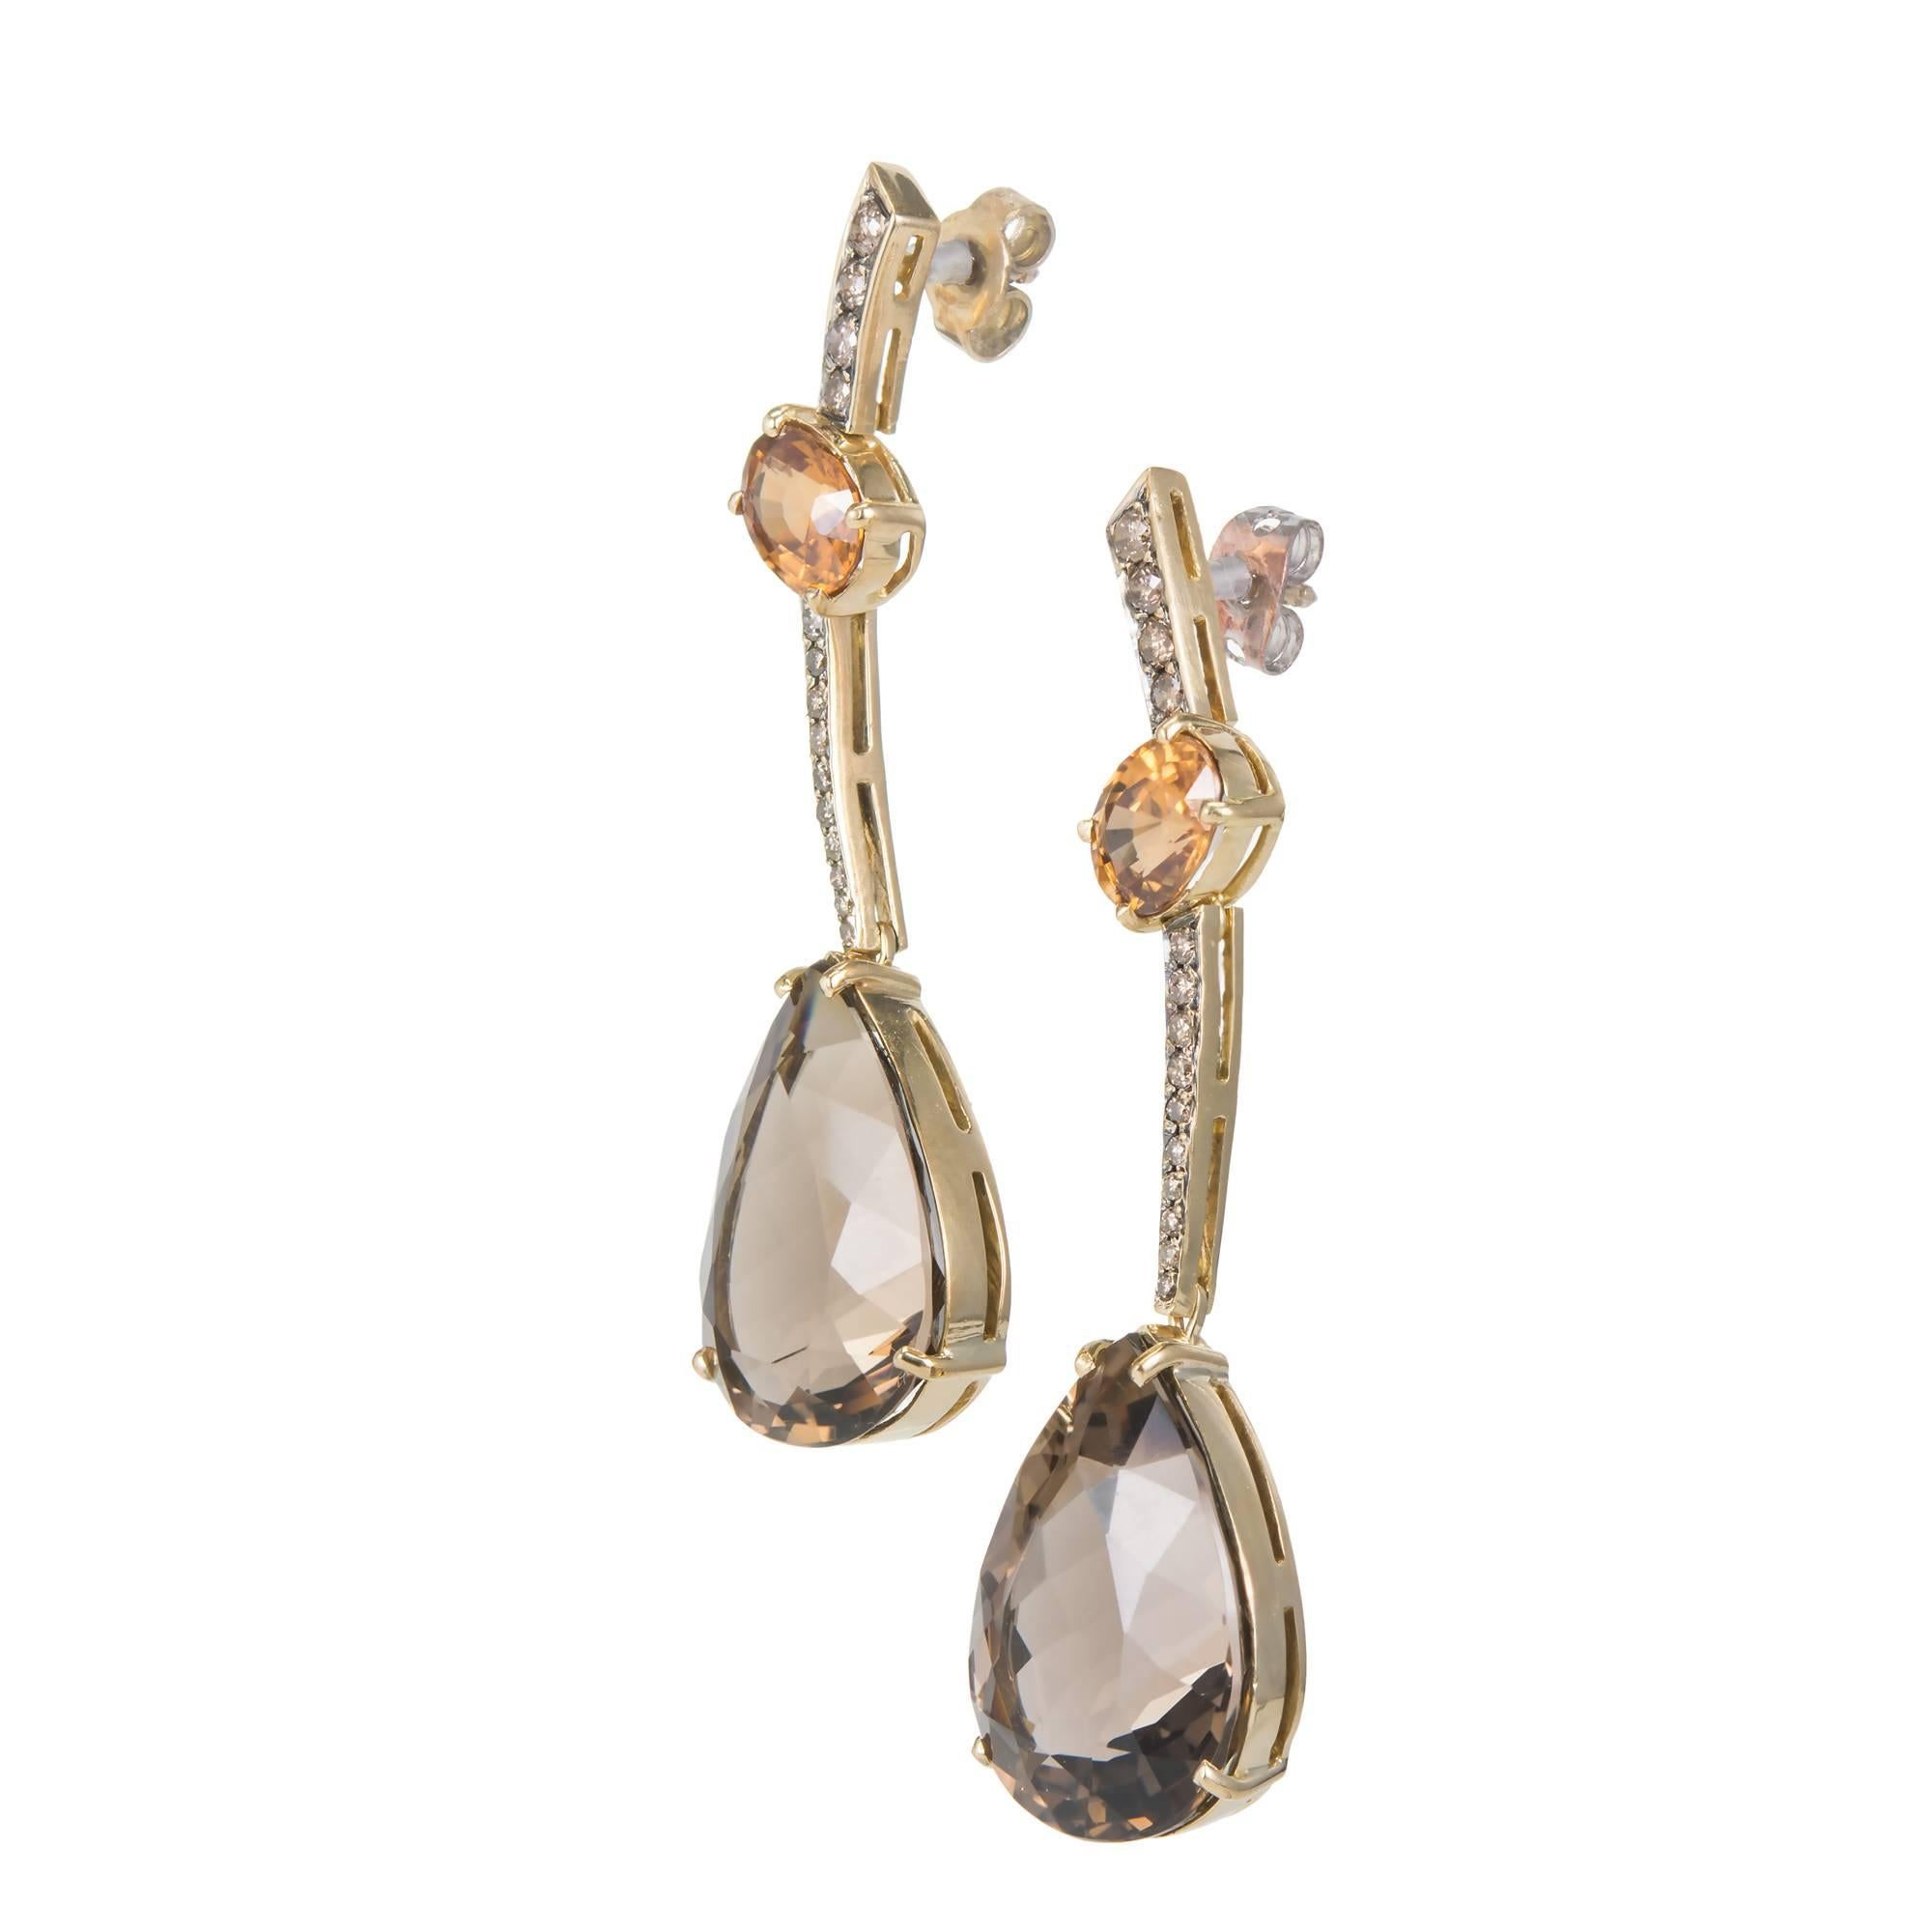 Citrine, smoky Quartz and diamond dangle drop earrings, in 14k yellow gold. 

26 round Champagne or light brown color Diamonds, approx. total weight .60cts, SI
2 oval golden yellow Citrines, approx. total weight 2.58cts, SI, 6 – 8.5mm
2 pear shape